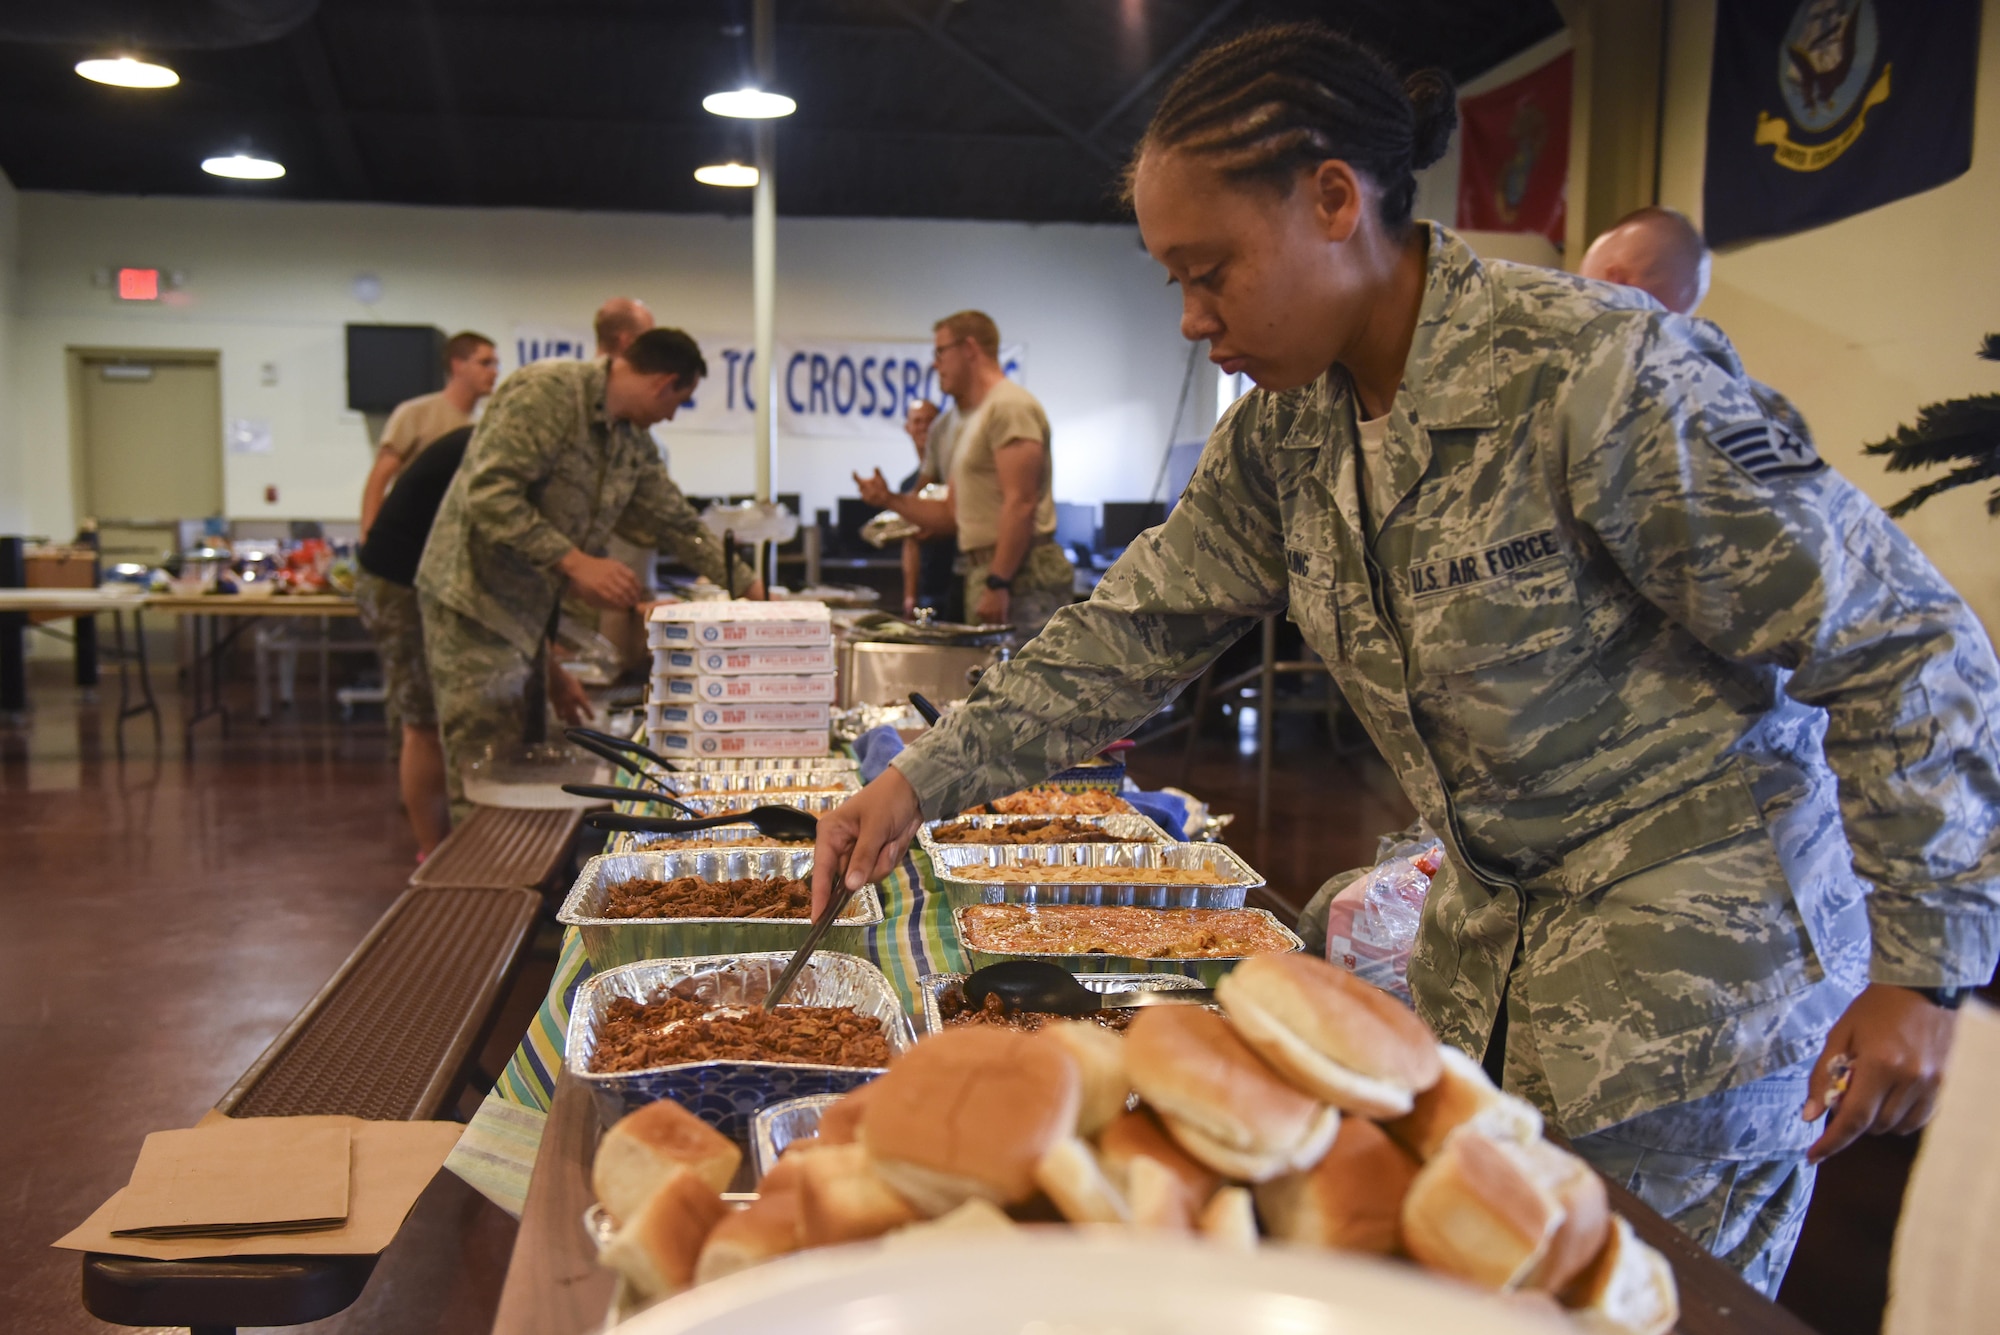 U.S. Air Force Staff Sgt. Cecile King, 315th Training Squadron instructor, lays out food for the Airmen dorm dinner at the Crossroads on Goodfellow Air Force Base, Texas, Aug. 25, 2017. The dinner showed appreciation for Airmen and was free of charge. (U.S. Air Force photo by Airman 1st Class Chase Sousa/Released)